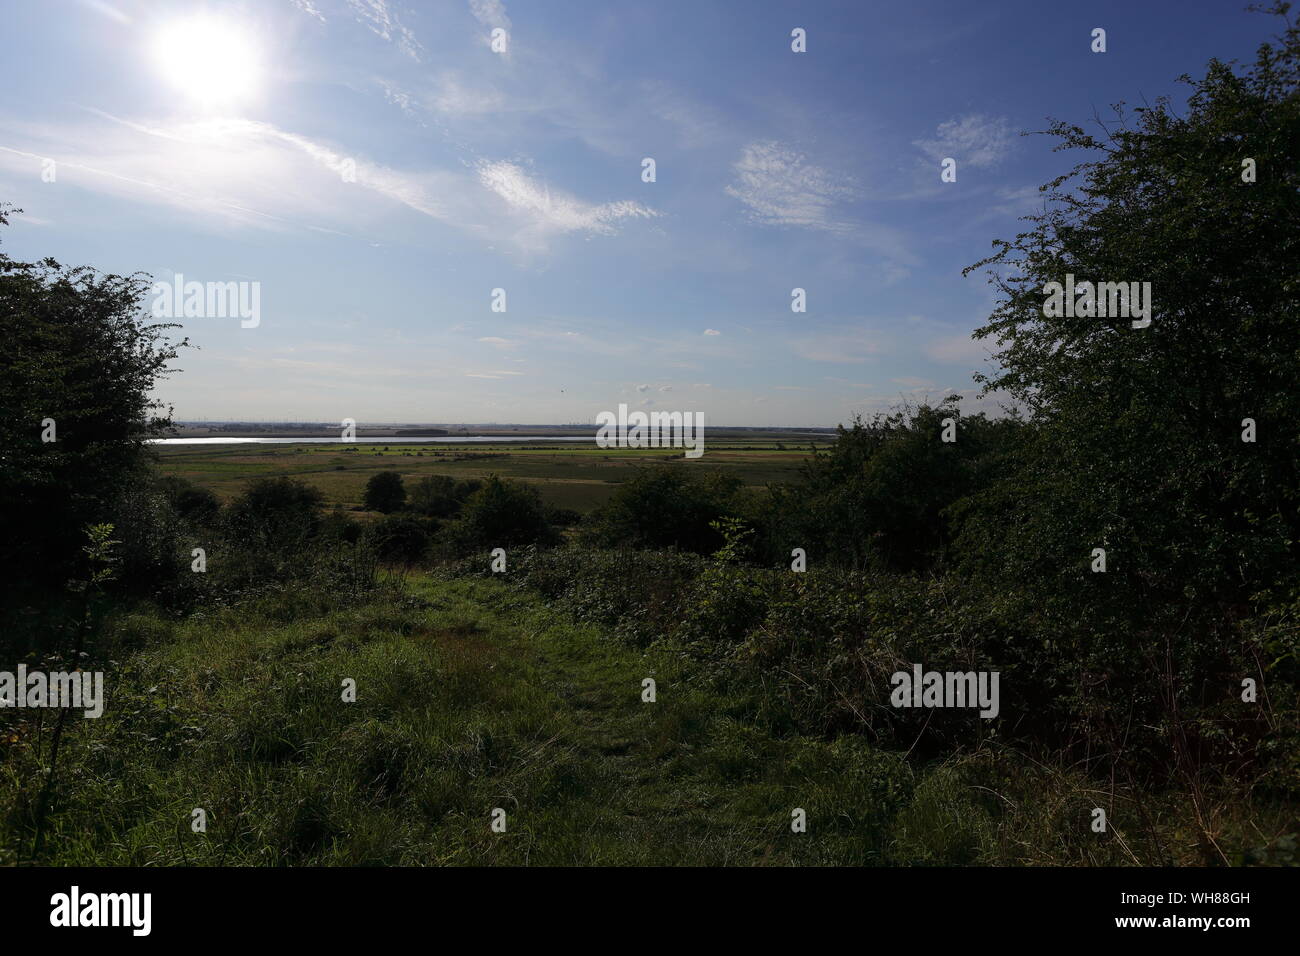 View of Flats (flat areas with ponds) from Jeremy's Bower Stock Photo